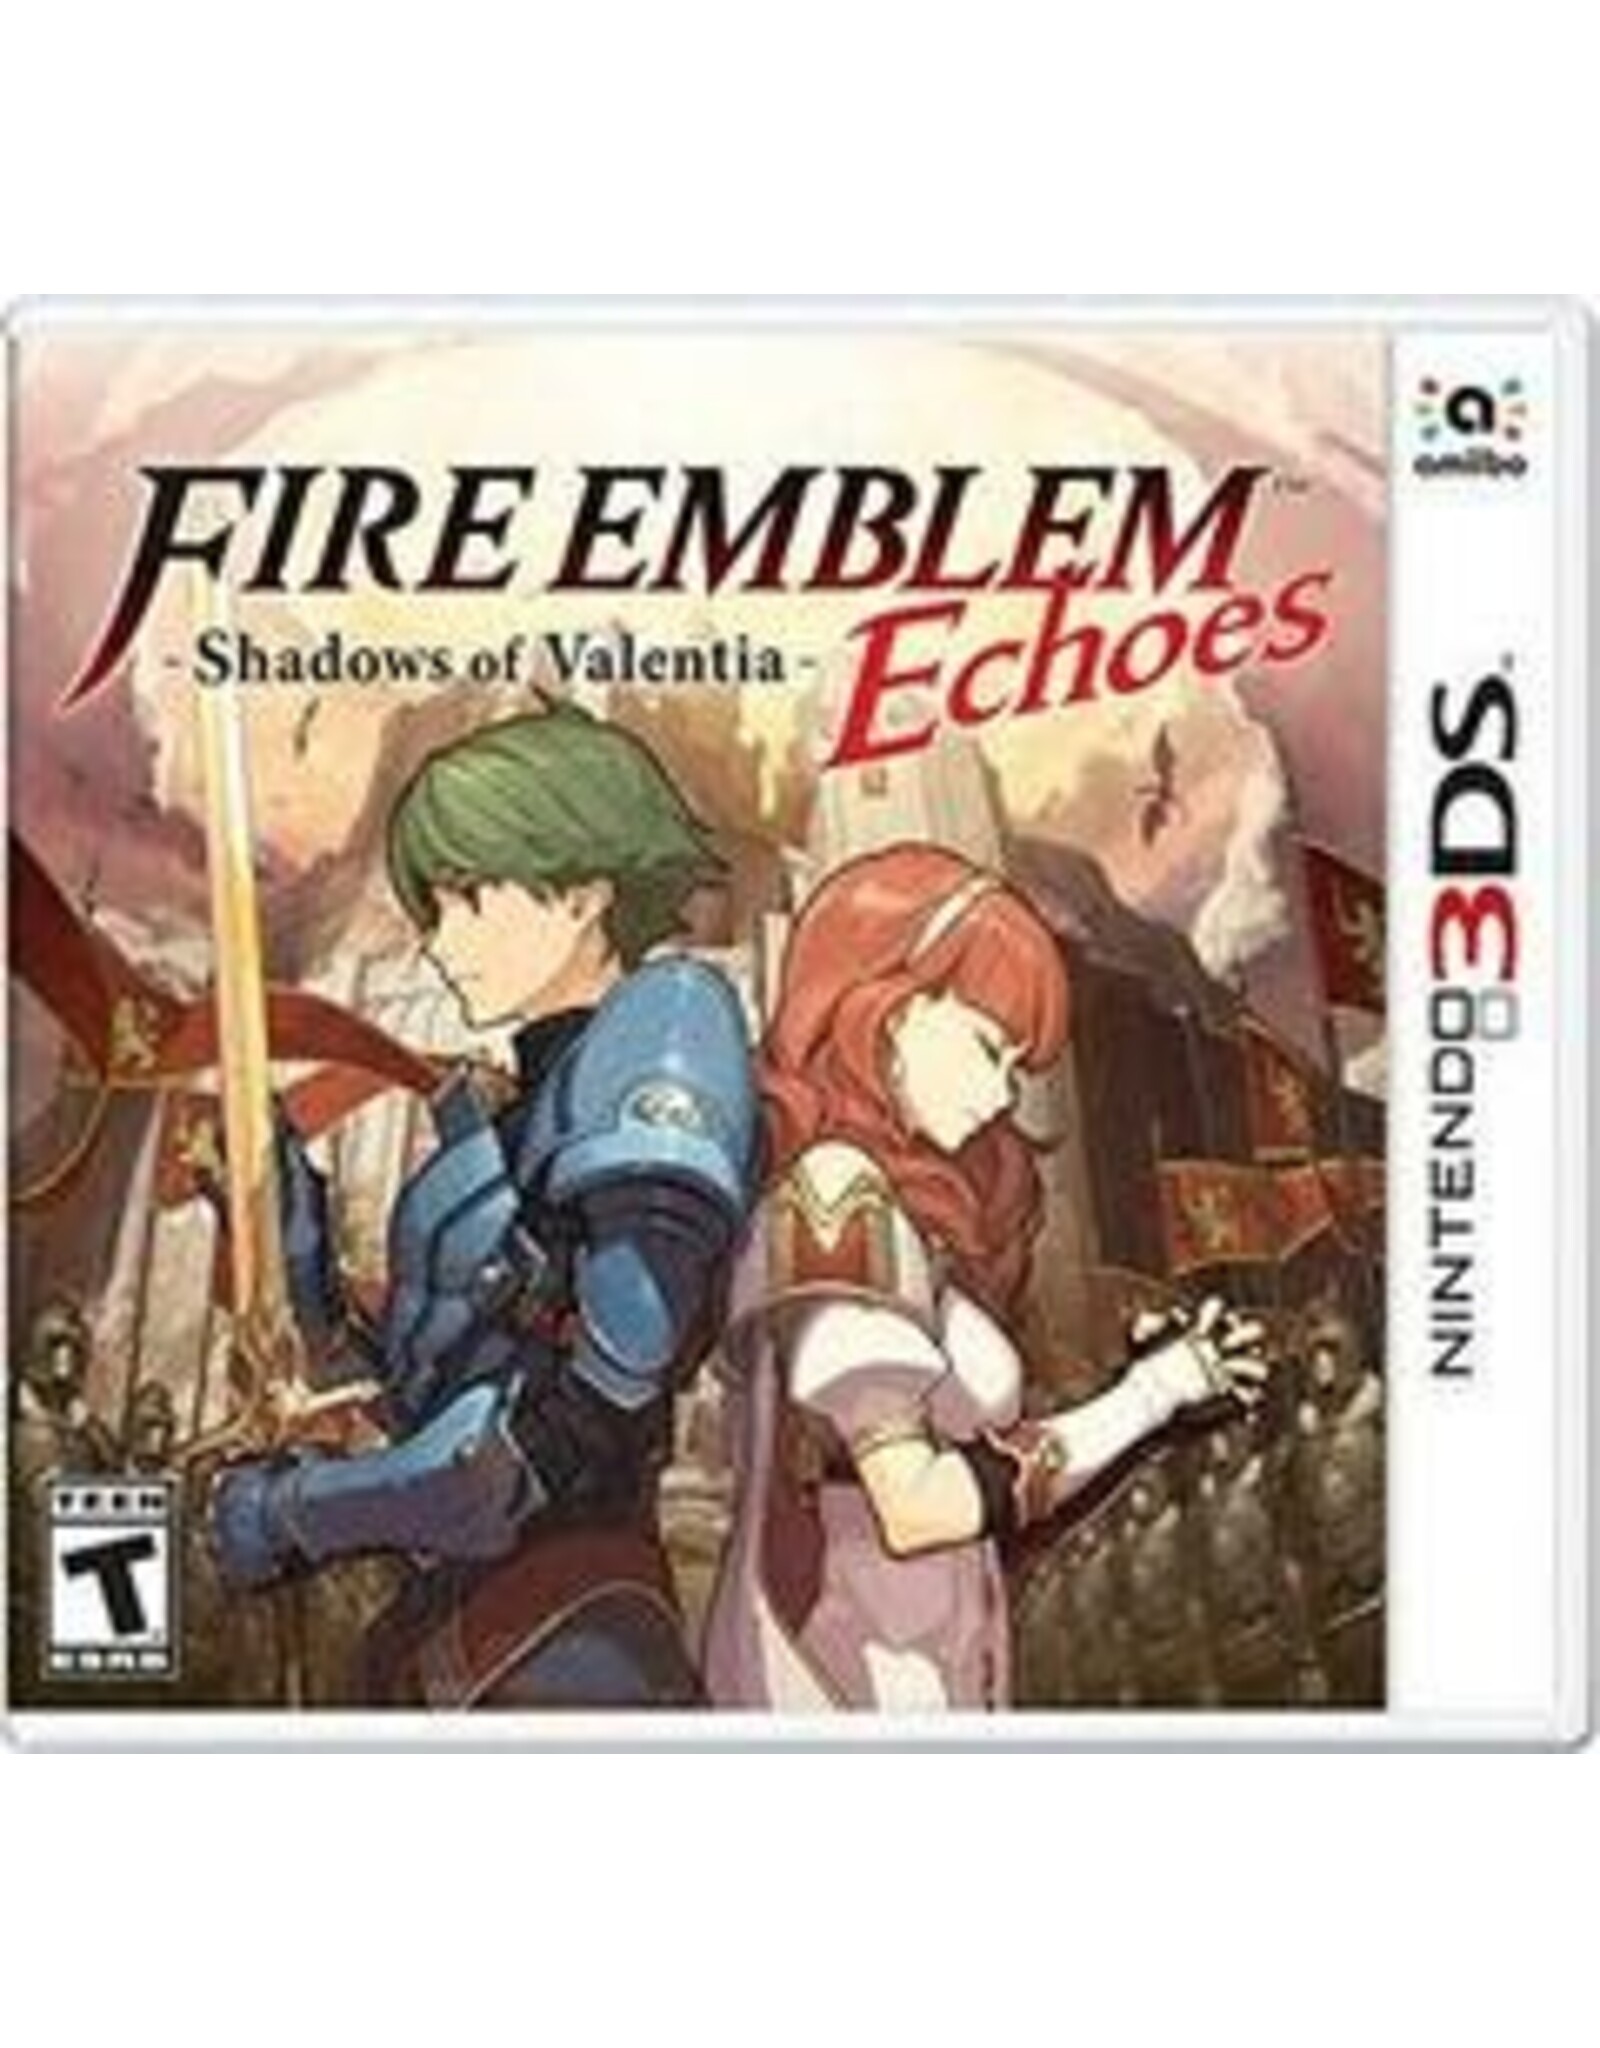 Nintendo 3DS Fire Emblem Echoes: Shadows of Valentia (Used)